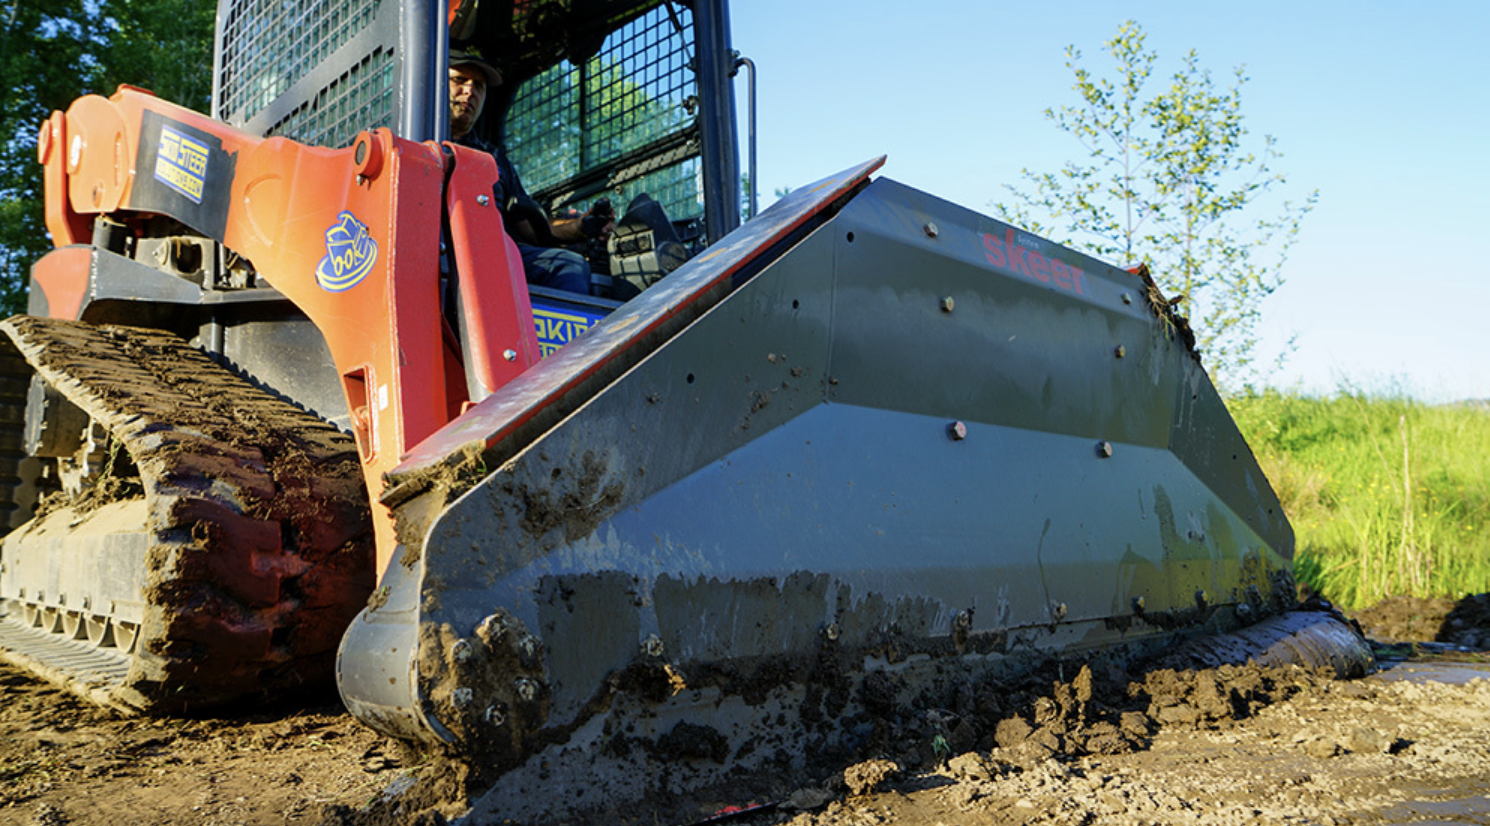 left angled view of a skid steer parked on dirt with a skeer skid steer precision grader attachment on the front